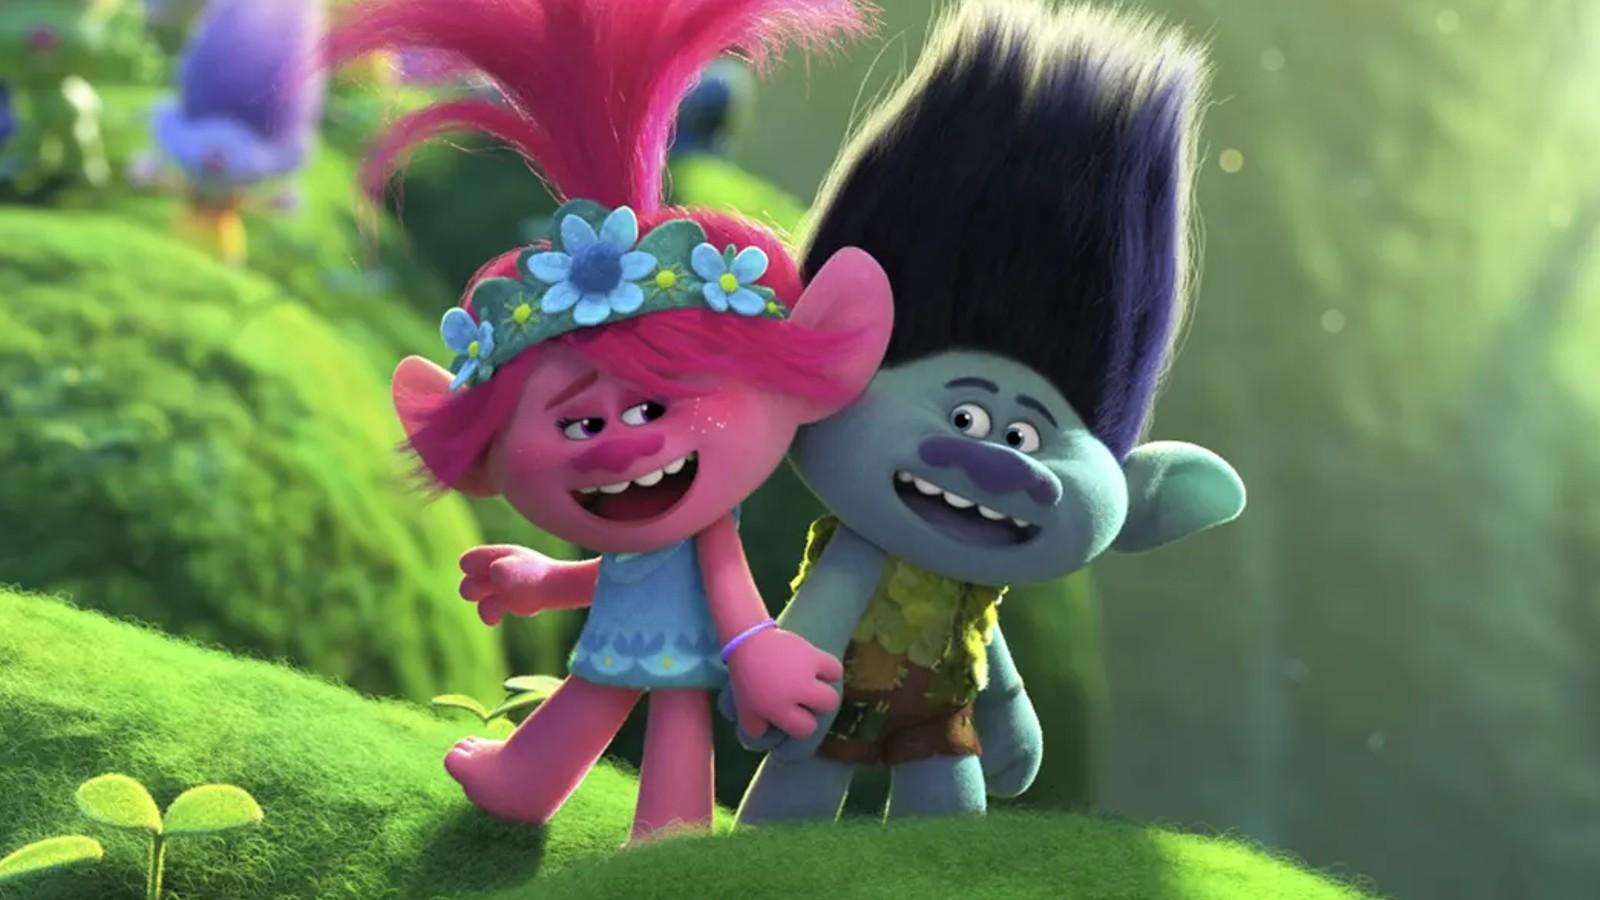 Trolls 3 Will Return The Franchise To Theaters In 2023